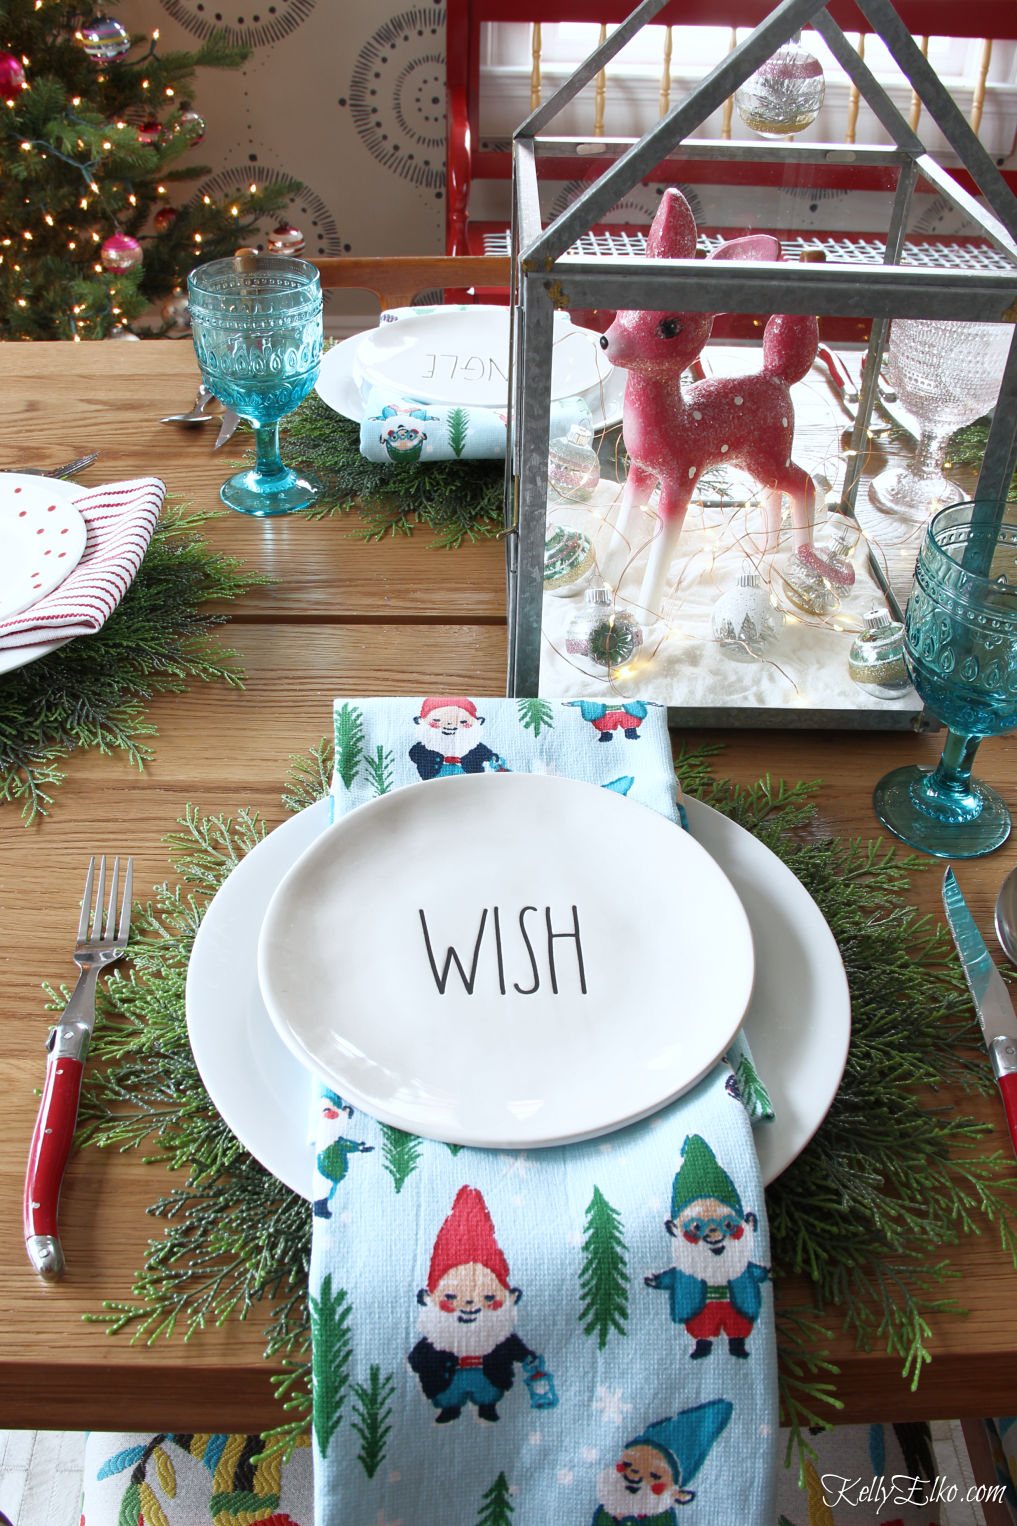 Love this fun Christmas table in blues and pinks and the cedar placemat and gnome napkins kellyelko.com #christmas #christmasdecor #christmastable #christmasdecorations #christmascenterpiece #raedunn #retrochristmas #vintagechristmas #gofinding 